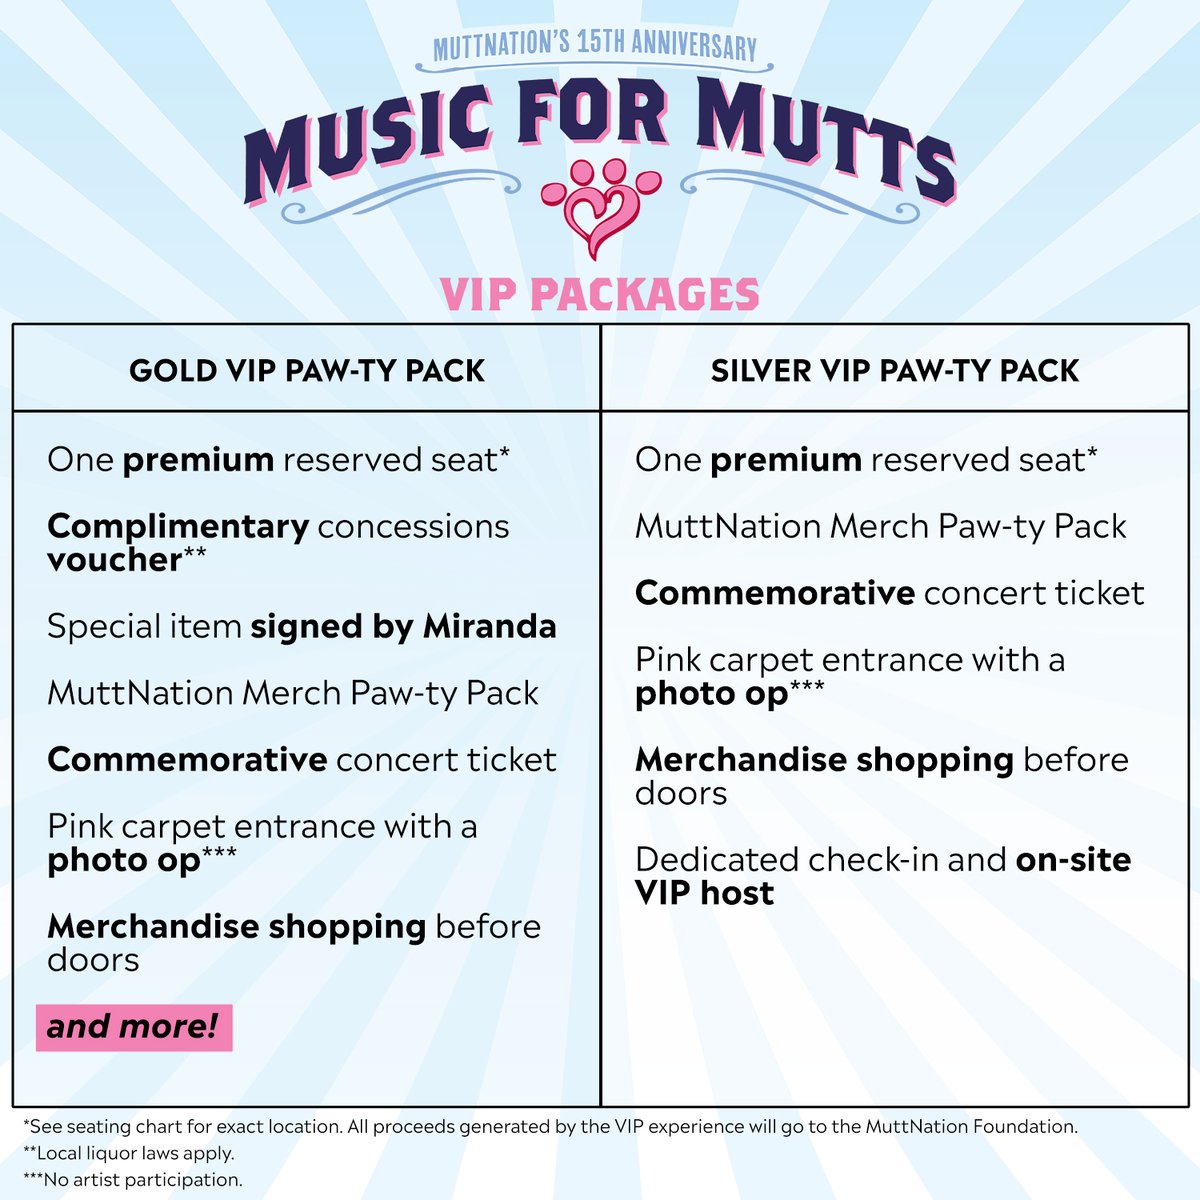 VIP Packages for the Music for Mutts, @MuttNation's benefit concert in Nashville, are also on sale now! Get a VIP package here: lnk.to/MNML24